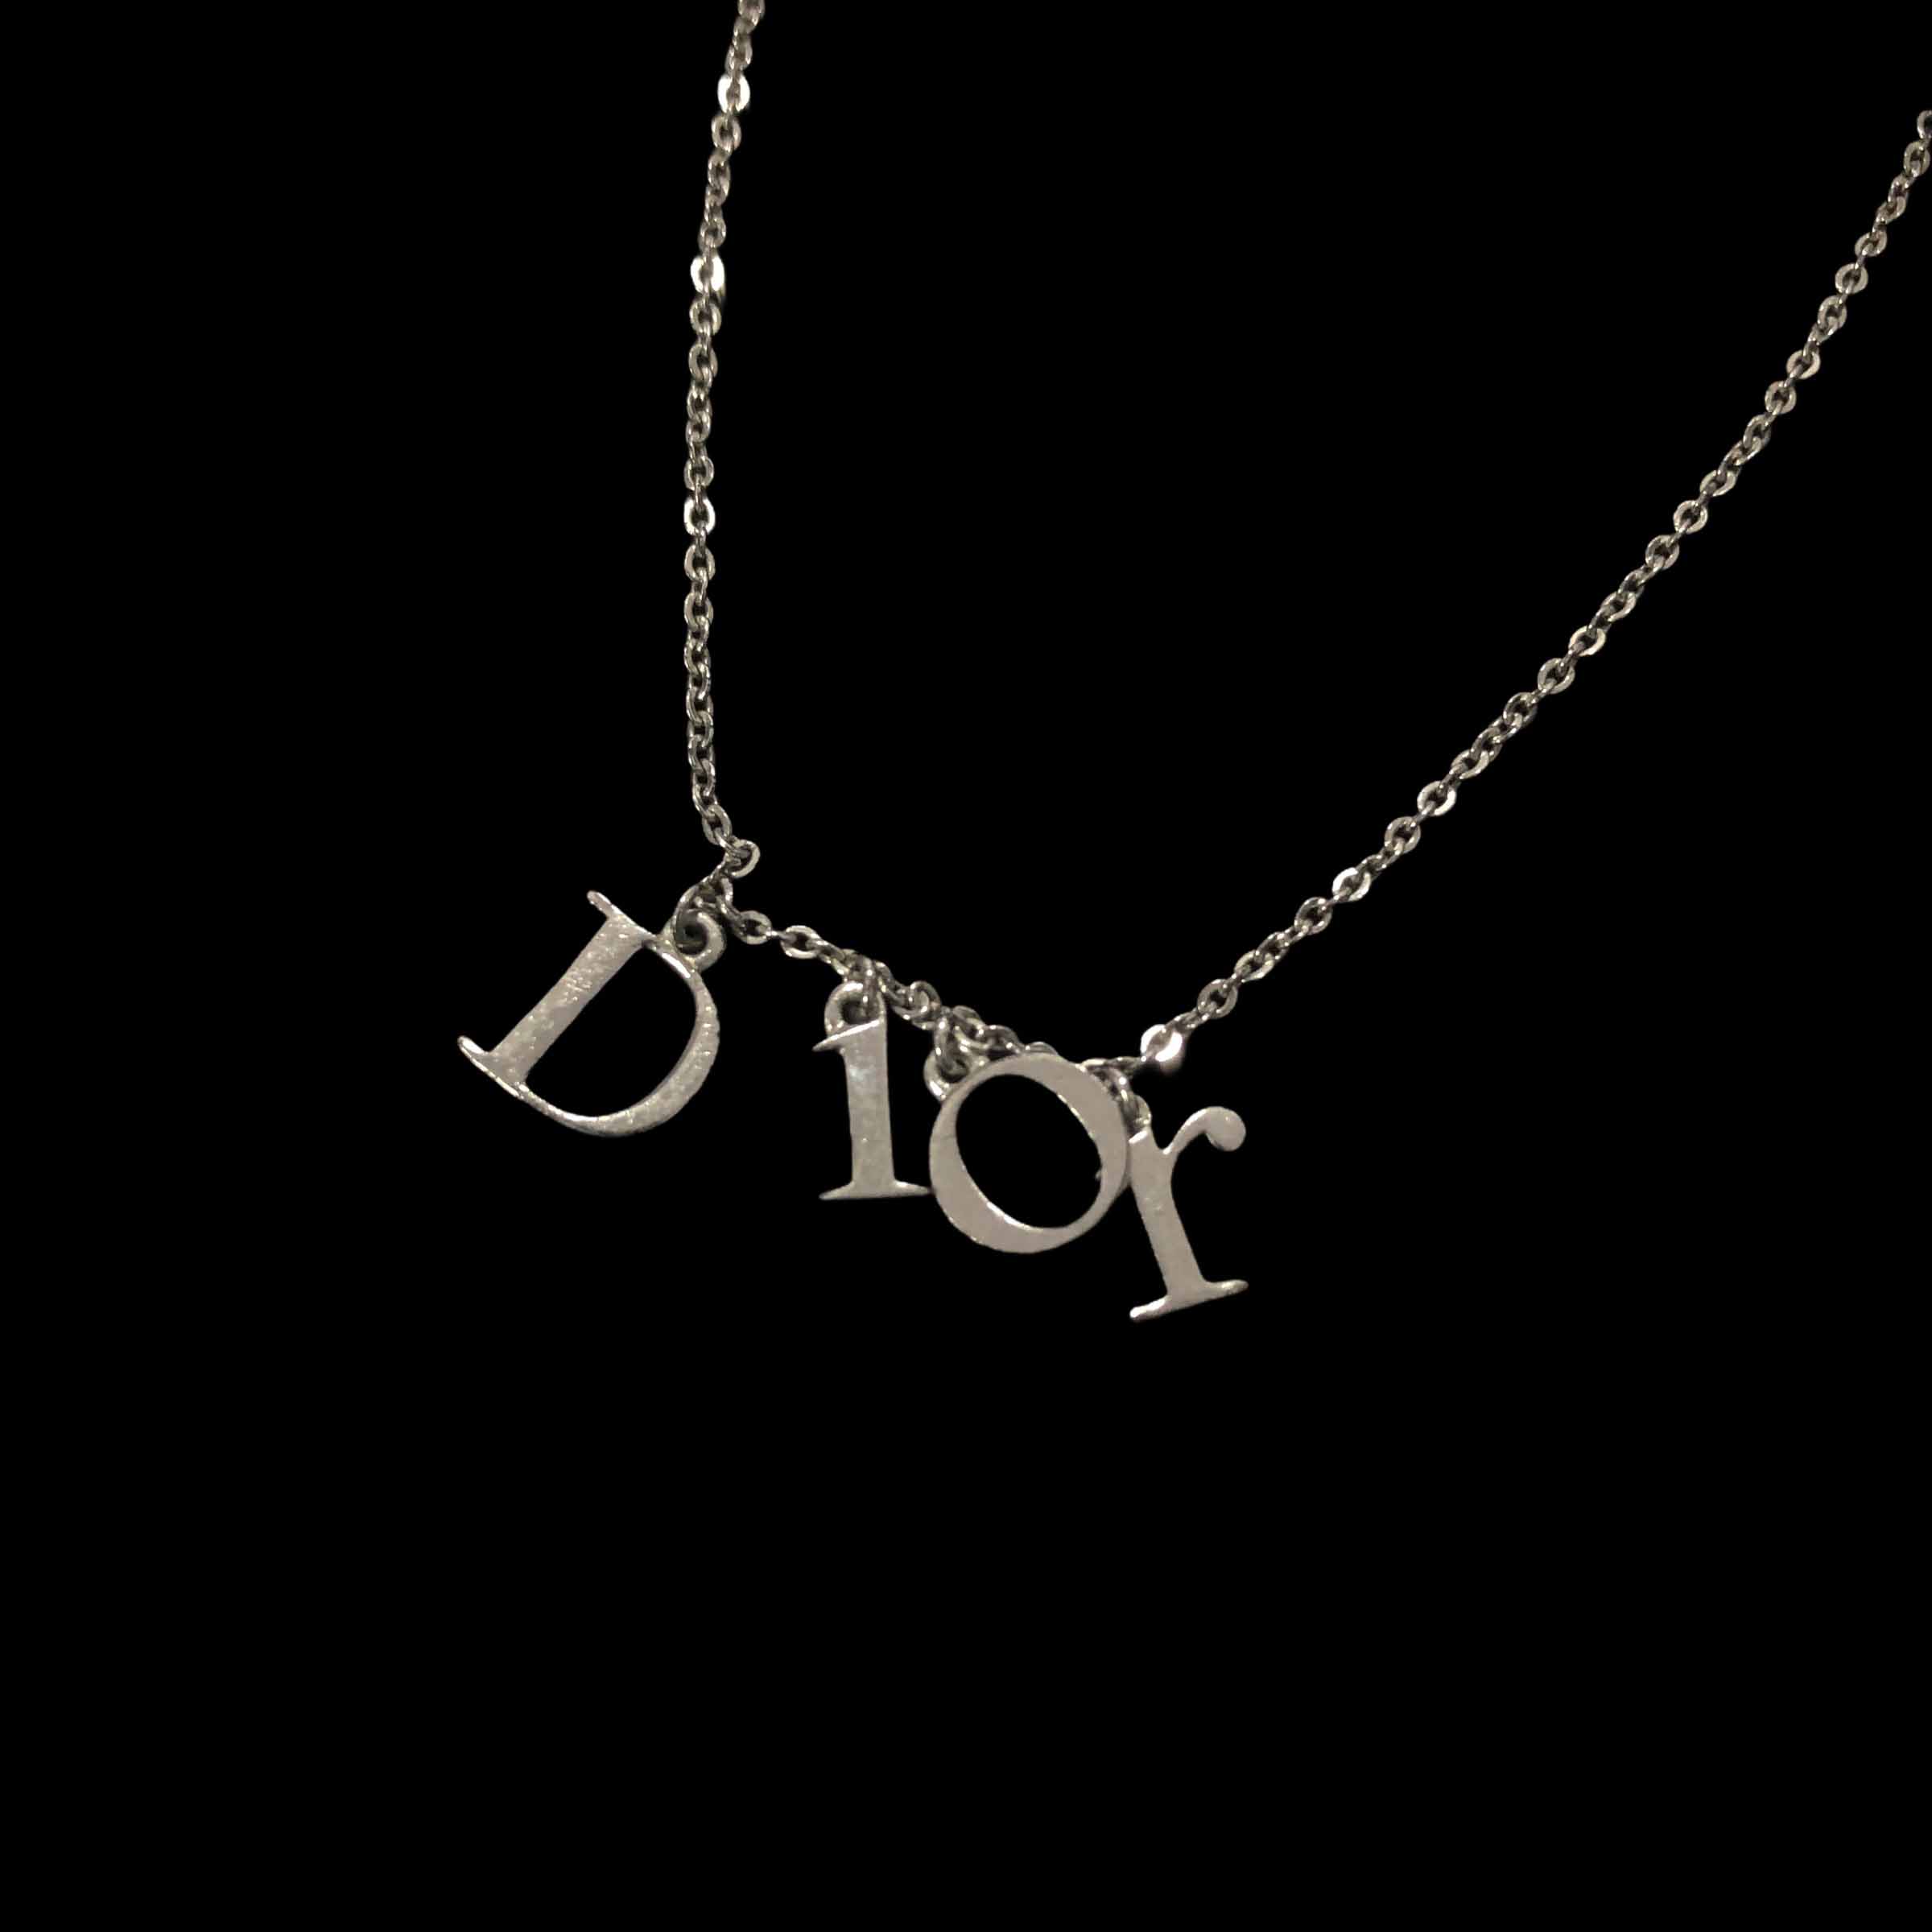 [Dior] Dior Logo Hanging Silver Necklace - Size Free